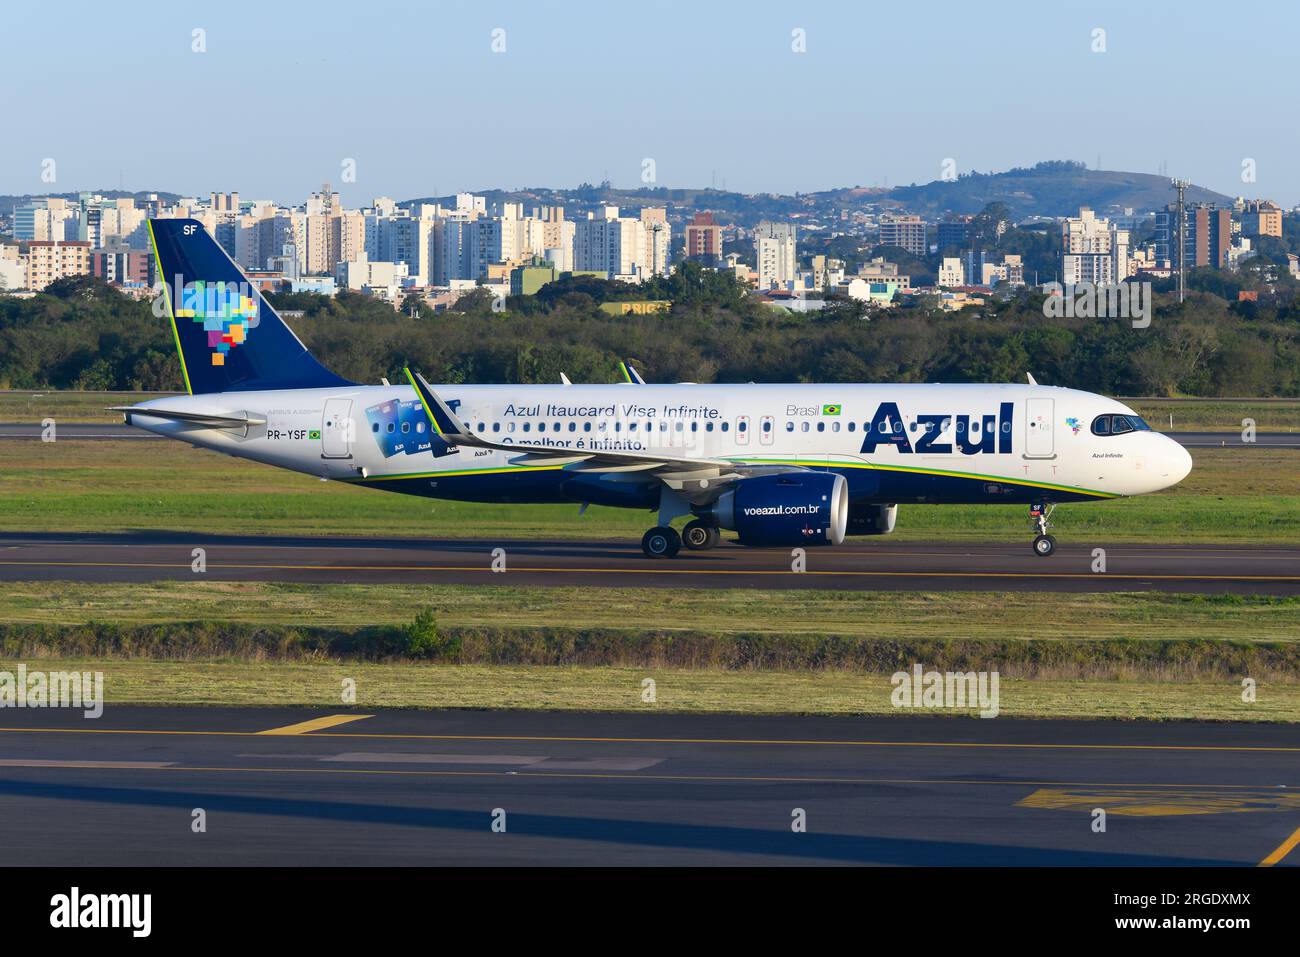 Azul Brazilian Airlines Airbus A320neo aircraft in Porto Alegre Airport, Brazil. Airplane of airline Azul Linhas Aéreas from Brazil A320. Stock Photo